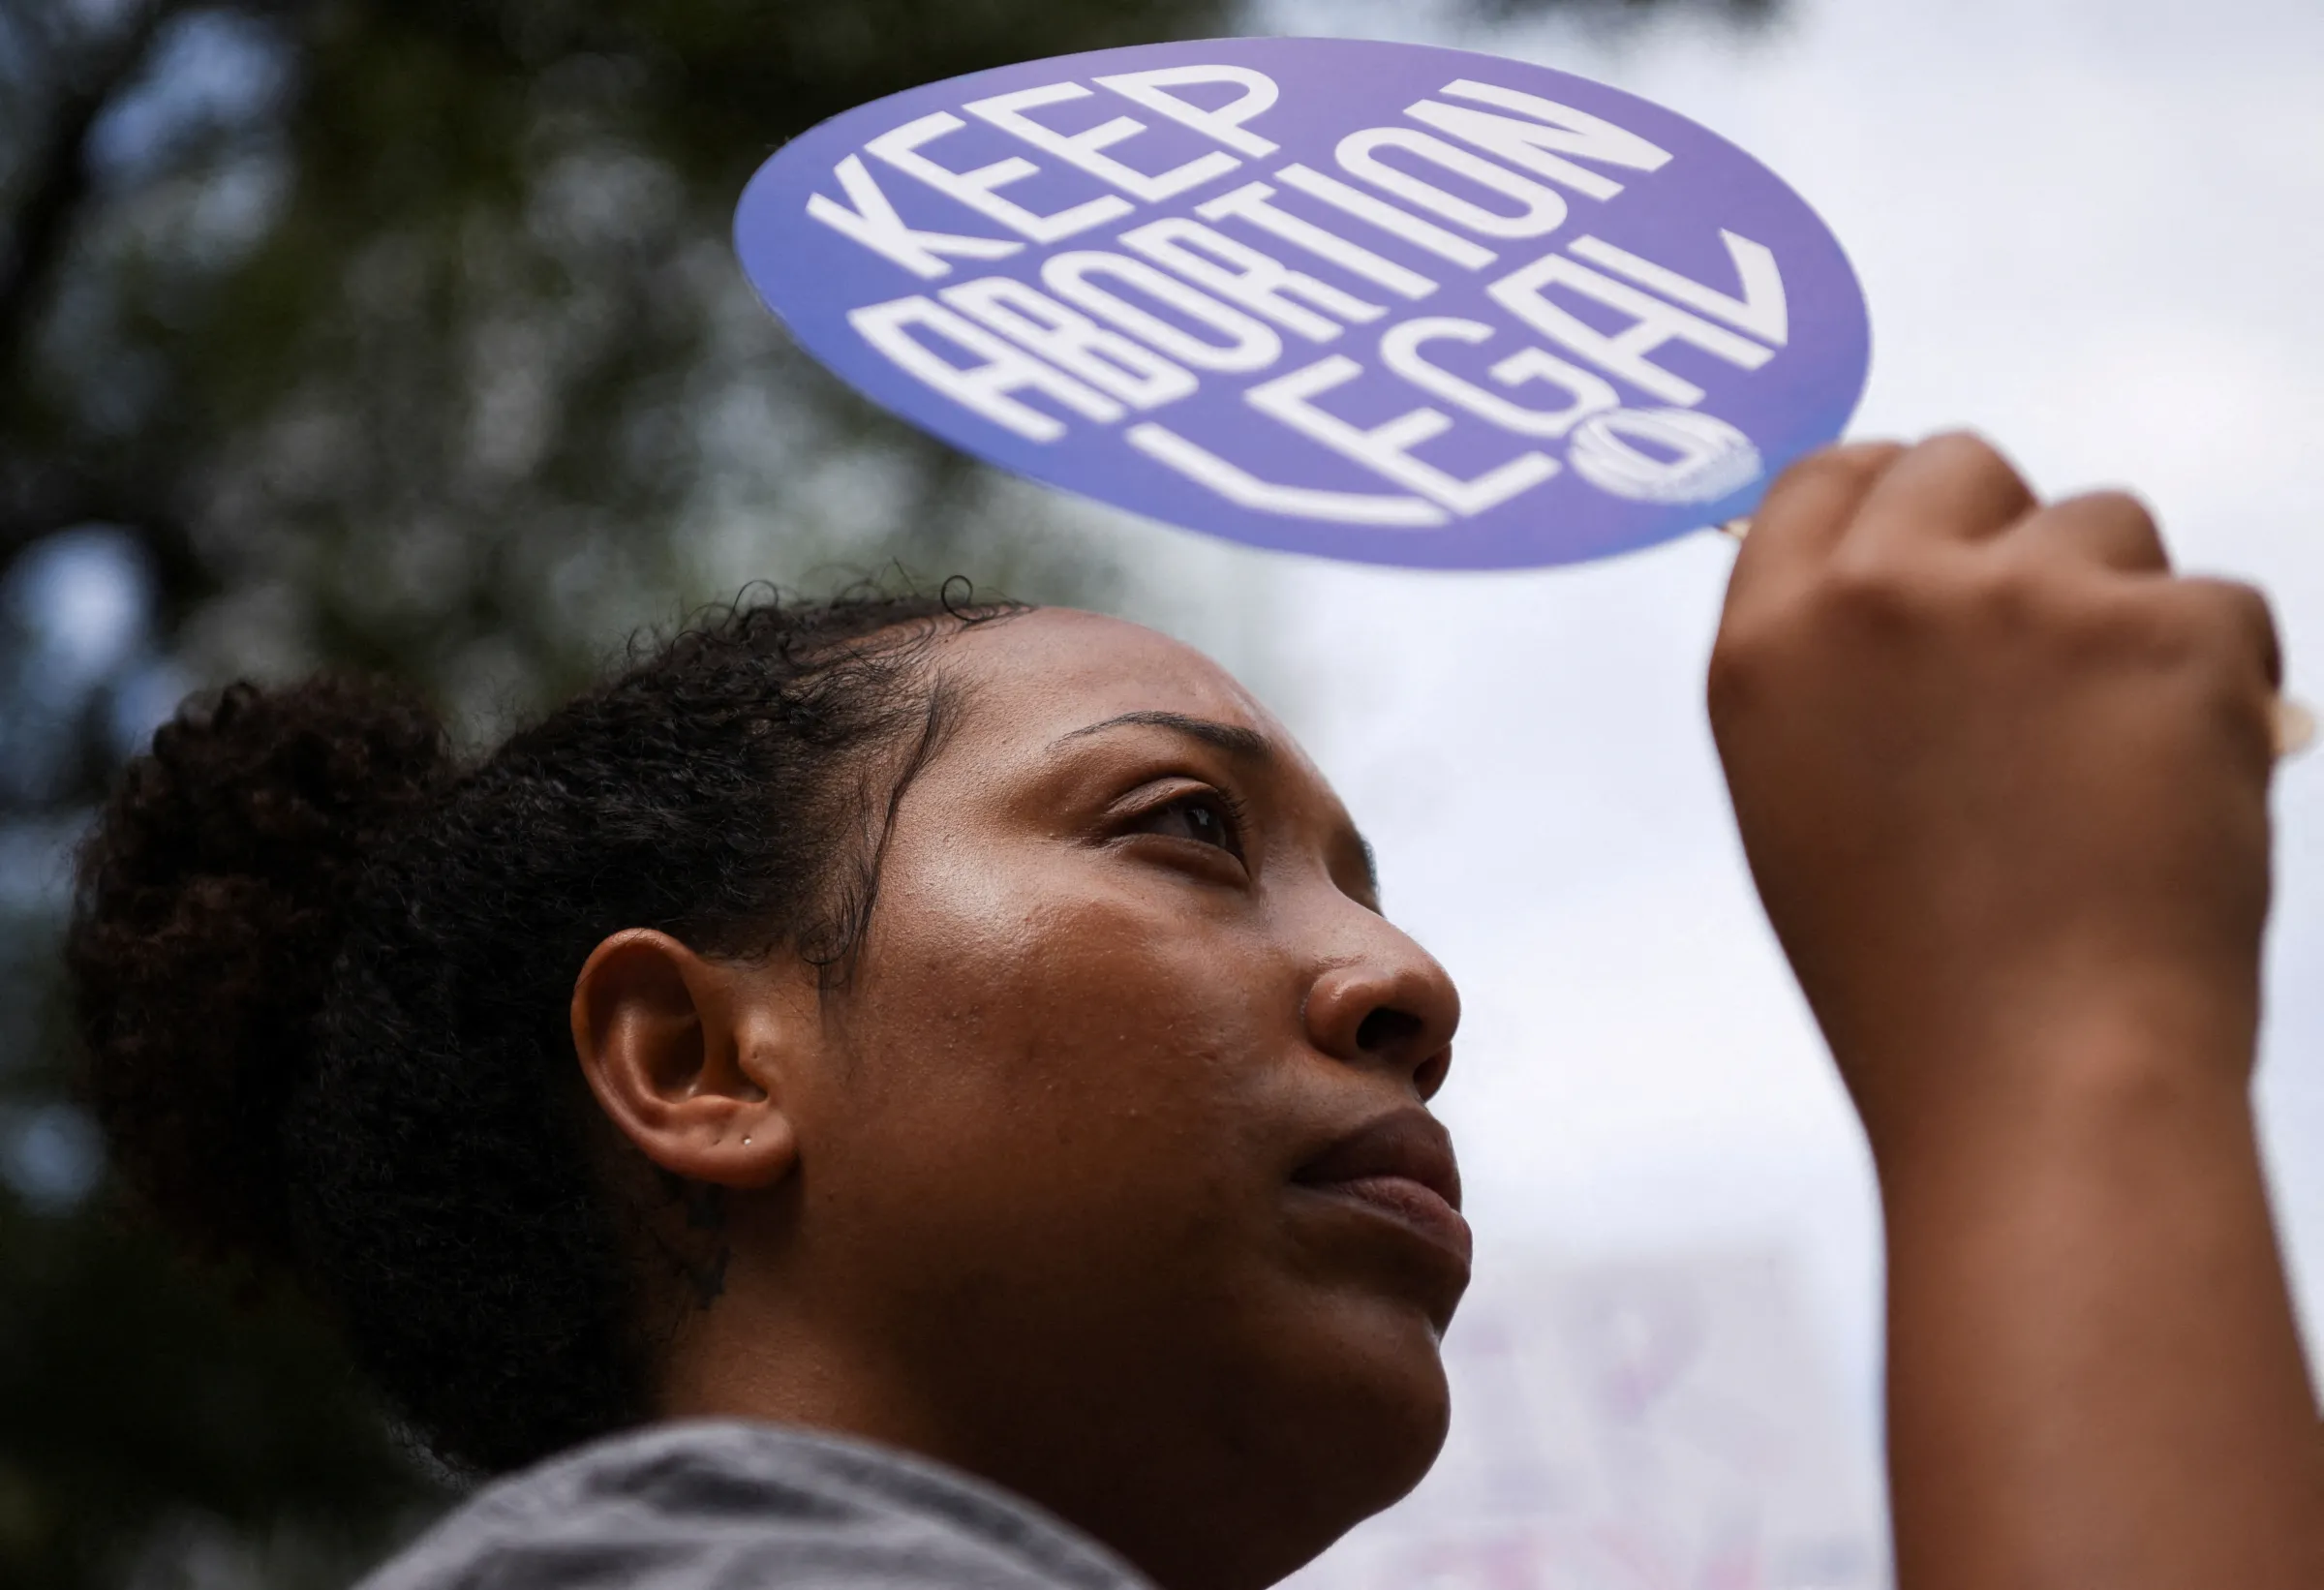 An abortion rights protester participates in nationwide demonstrations following the leaked Supreme Court opinion suggesting the possibility of overturning the Roe v. Wade abortion rights decision, in Houston, Texas, U.S., May 14, 2022.